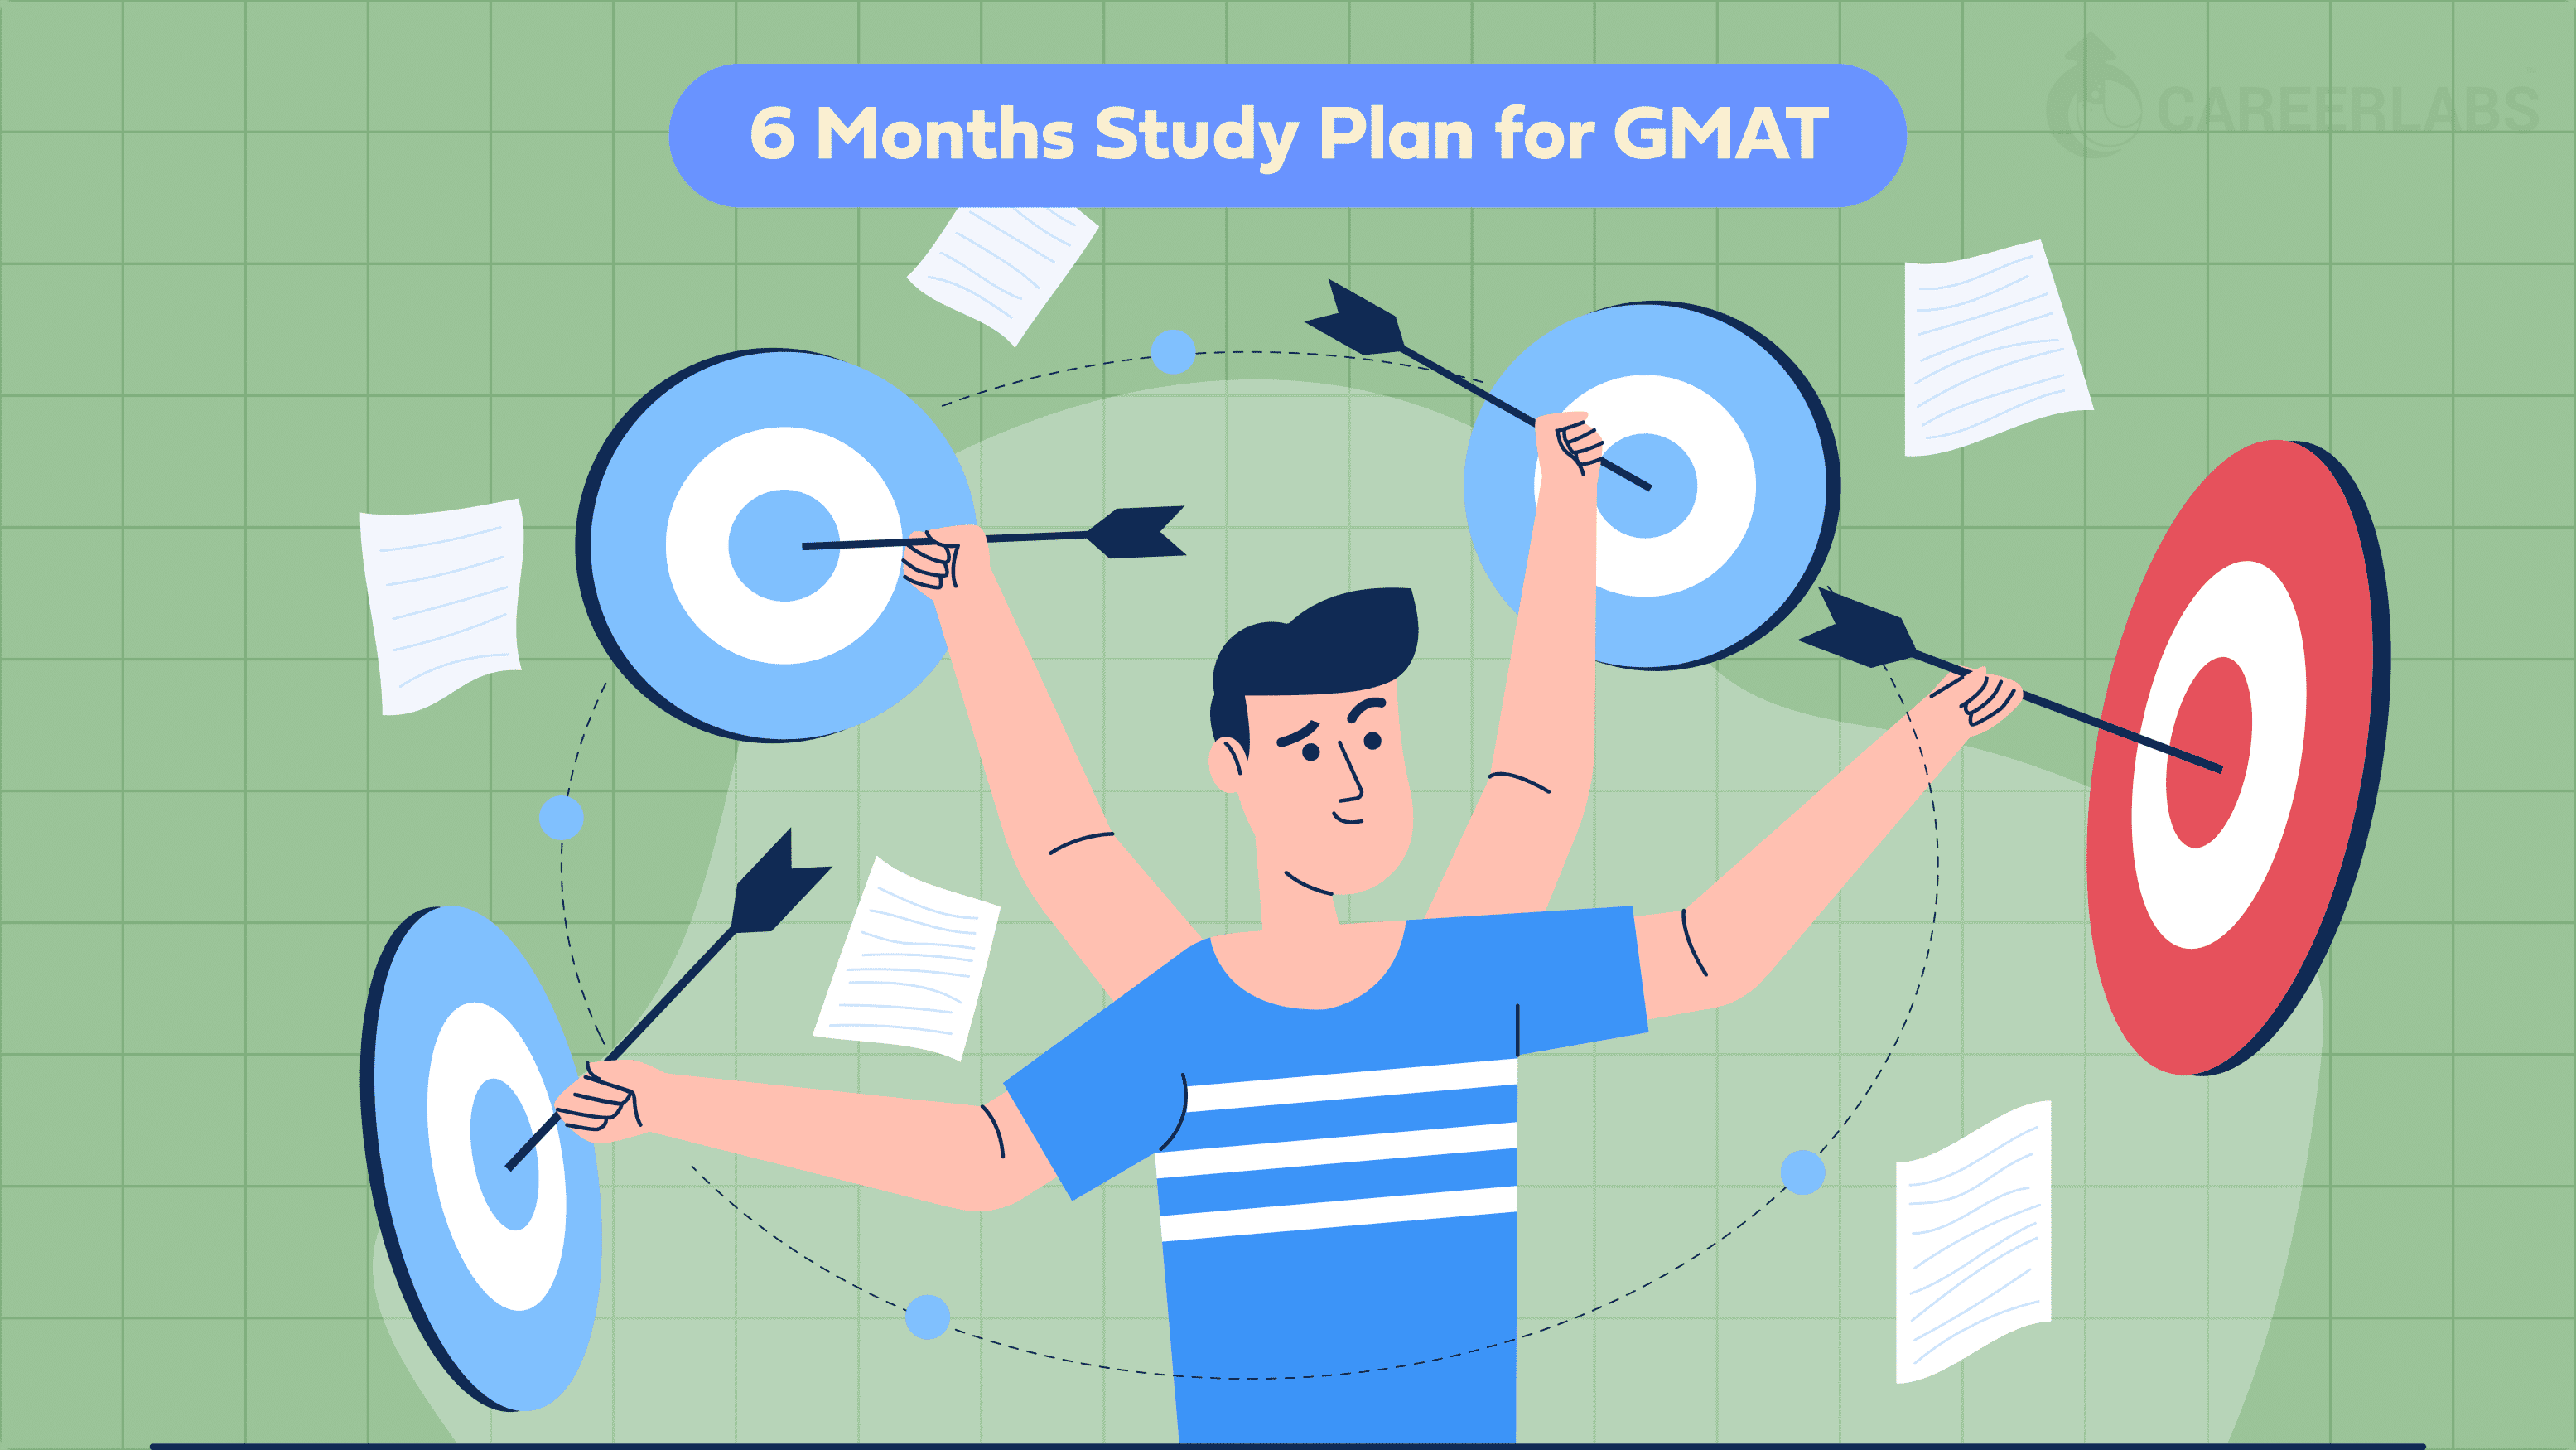 6 Months Study Plan for GMAT